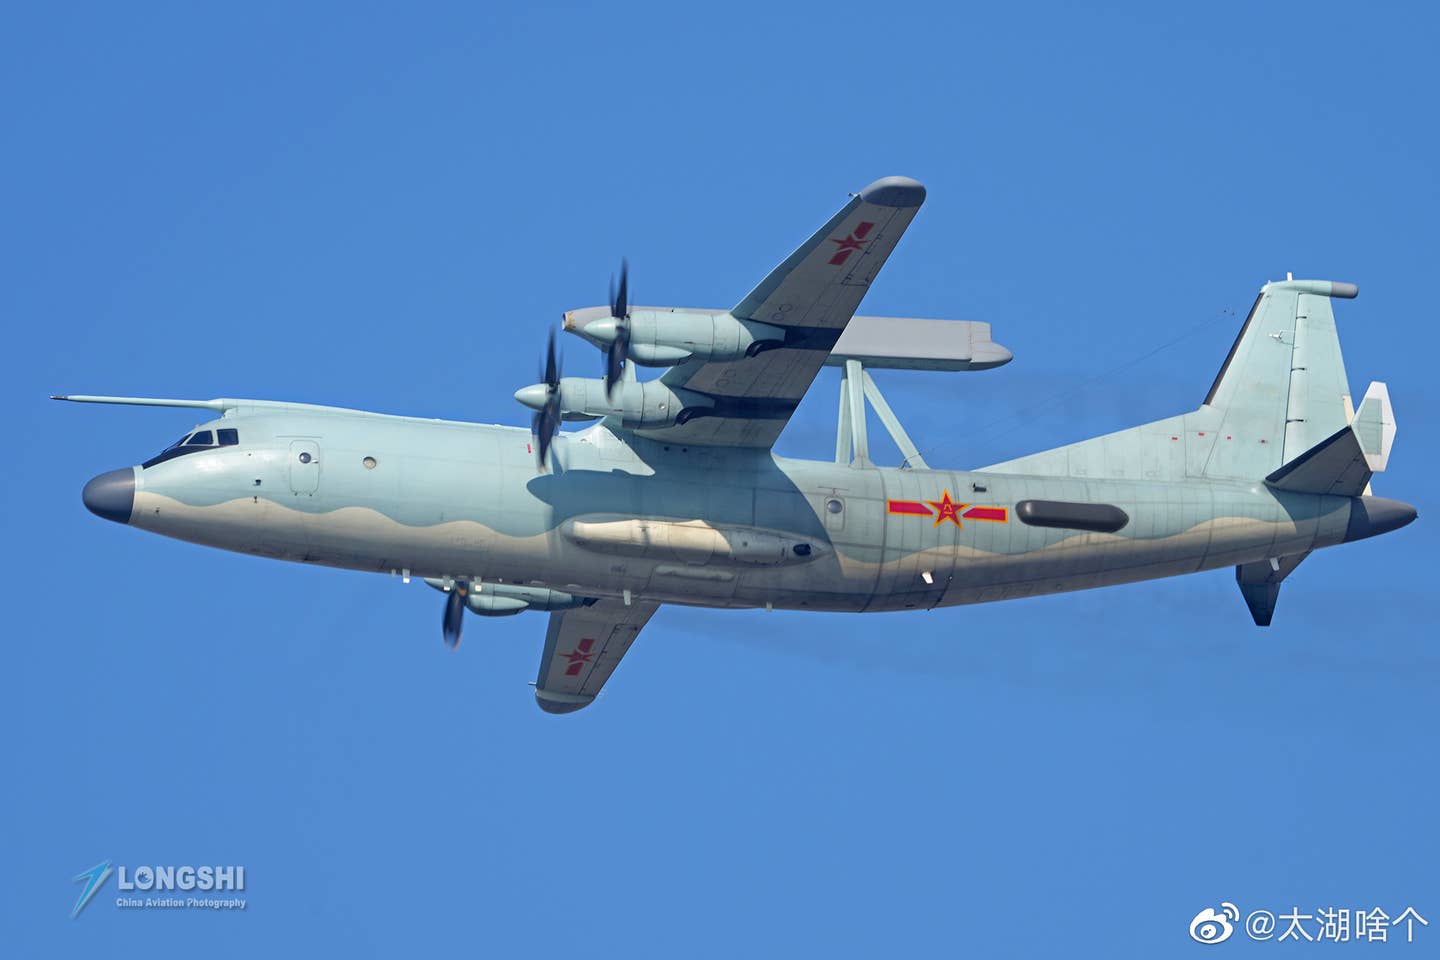 A KJ-200A fitted with an inflight refueling probe above the cockpit is unofficially known as the KJ-200AG. Note also the ESM antennas on the rear fuselage. <em>Longshi/via Chinese internet</em>